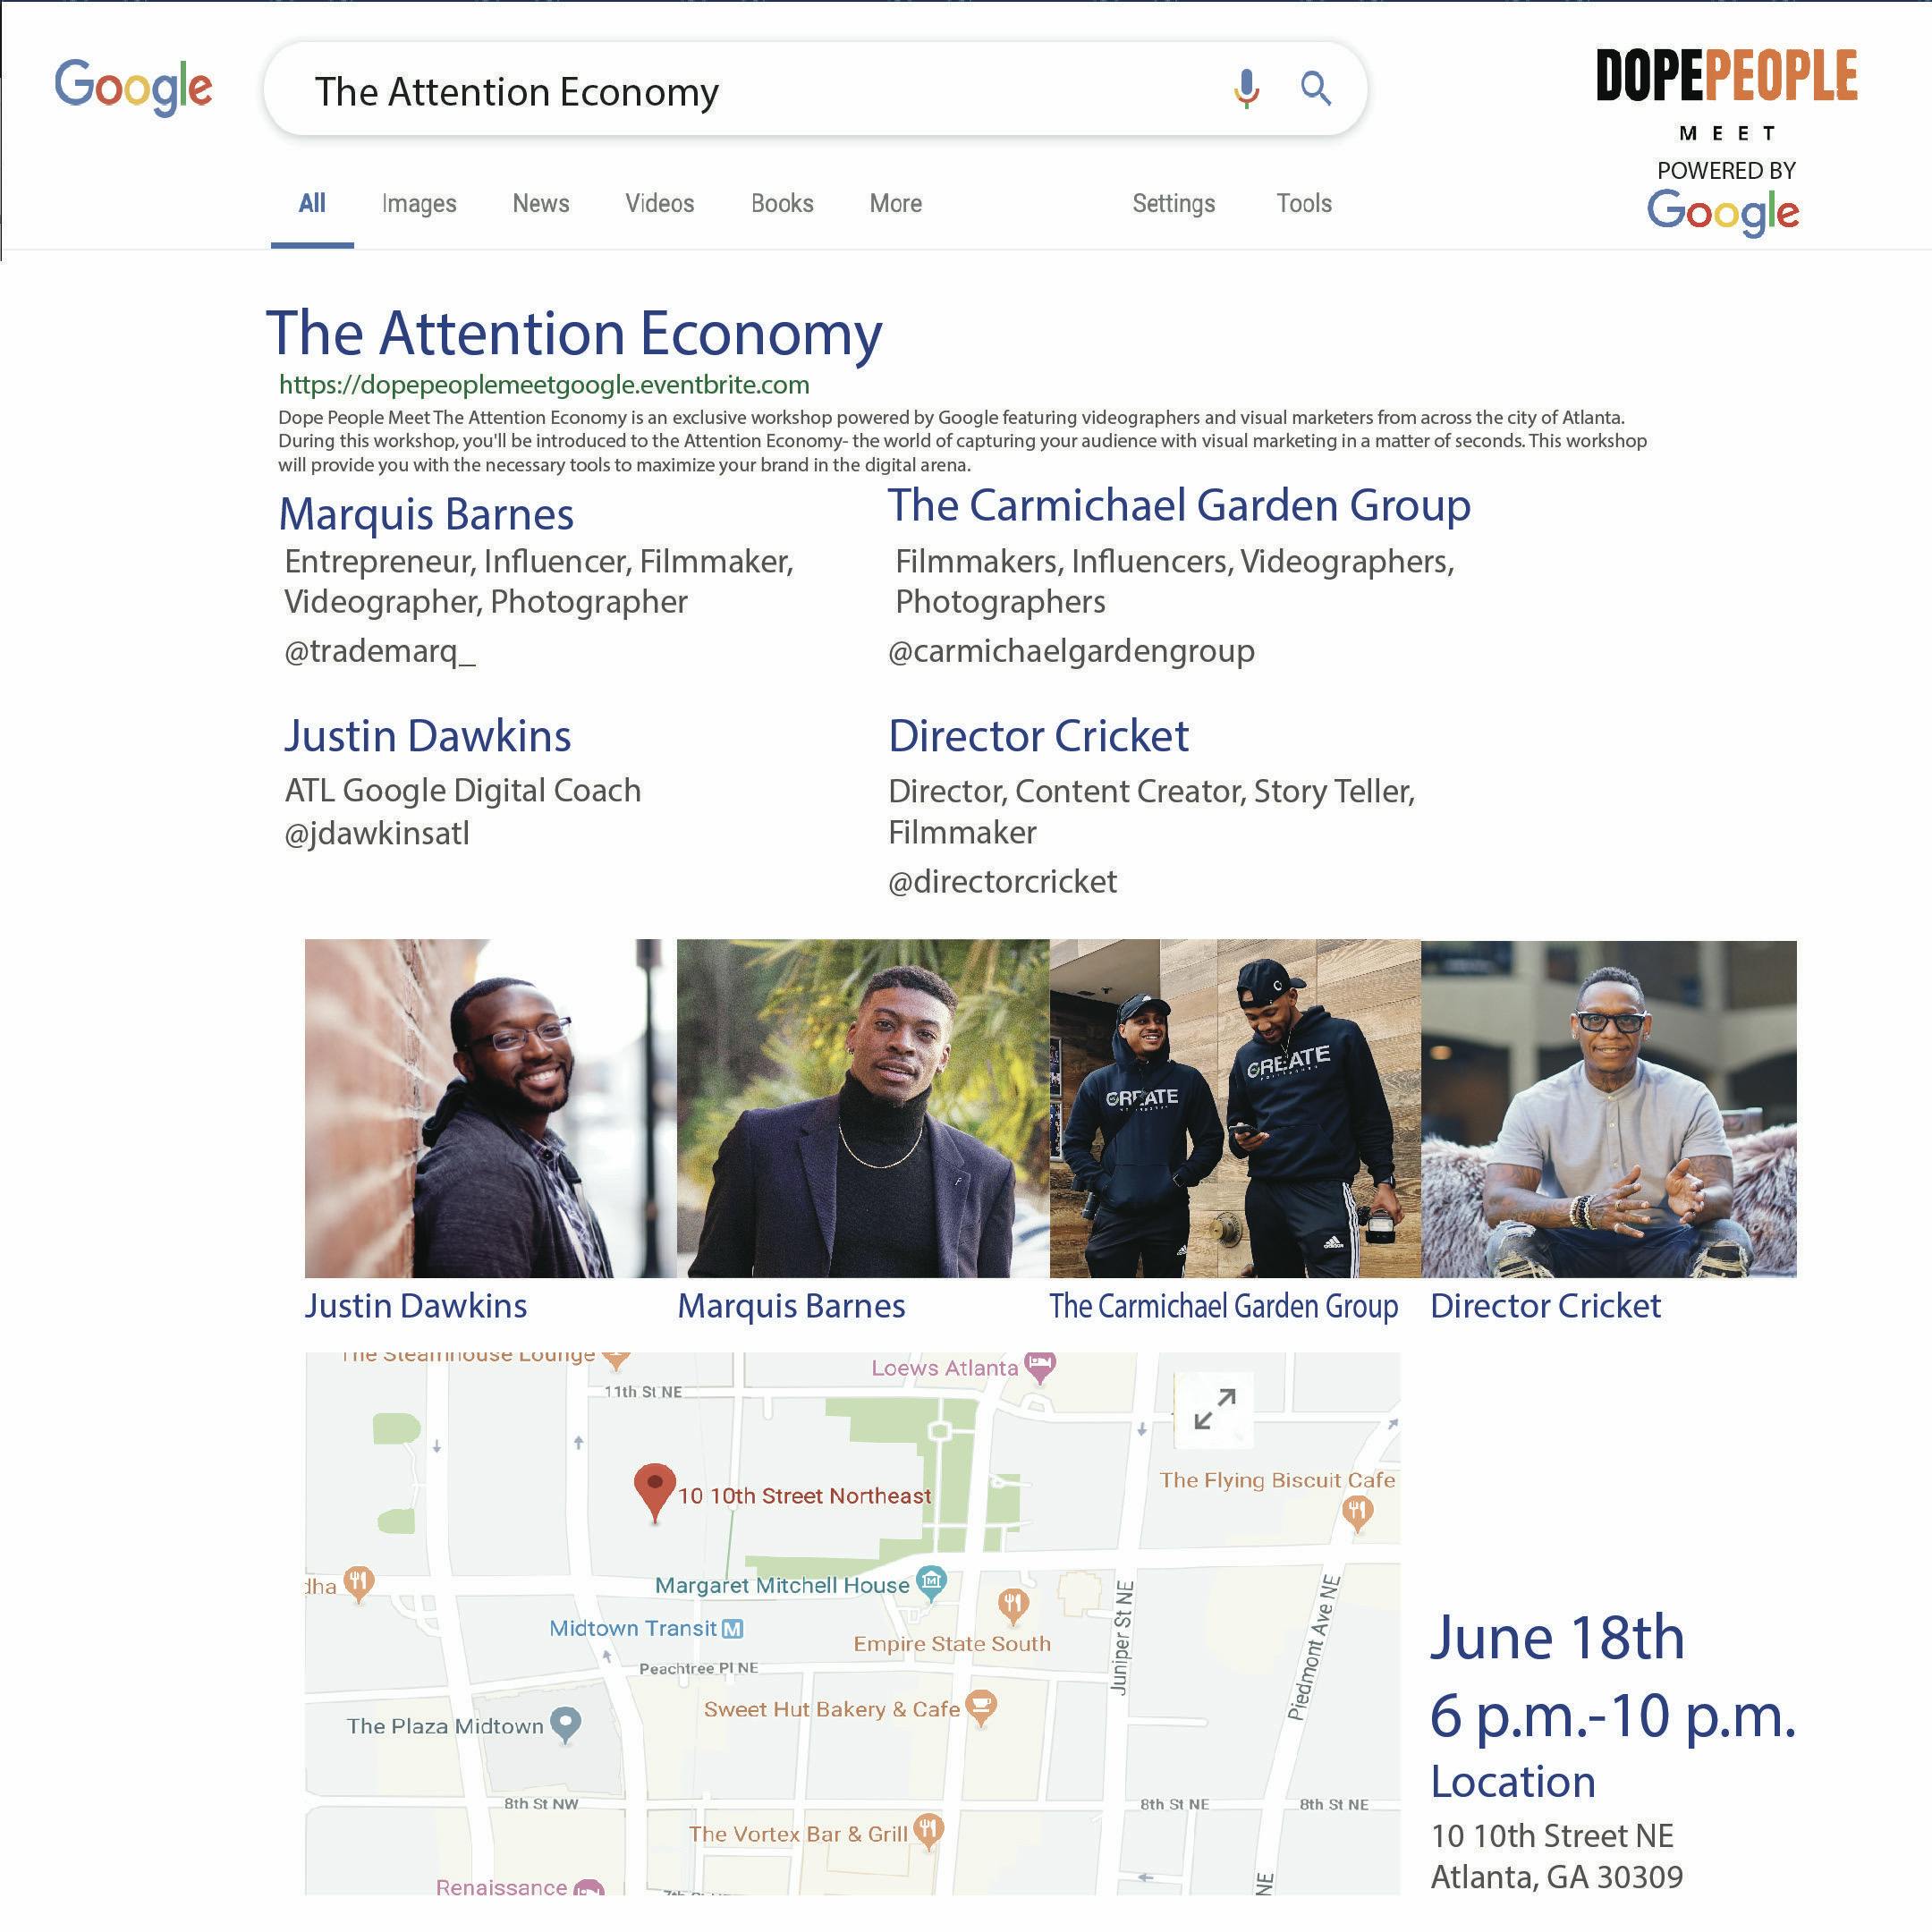 Dope People Meet “The Attention Economy” Powered by: Google